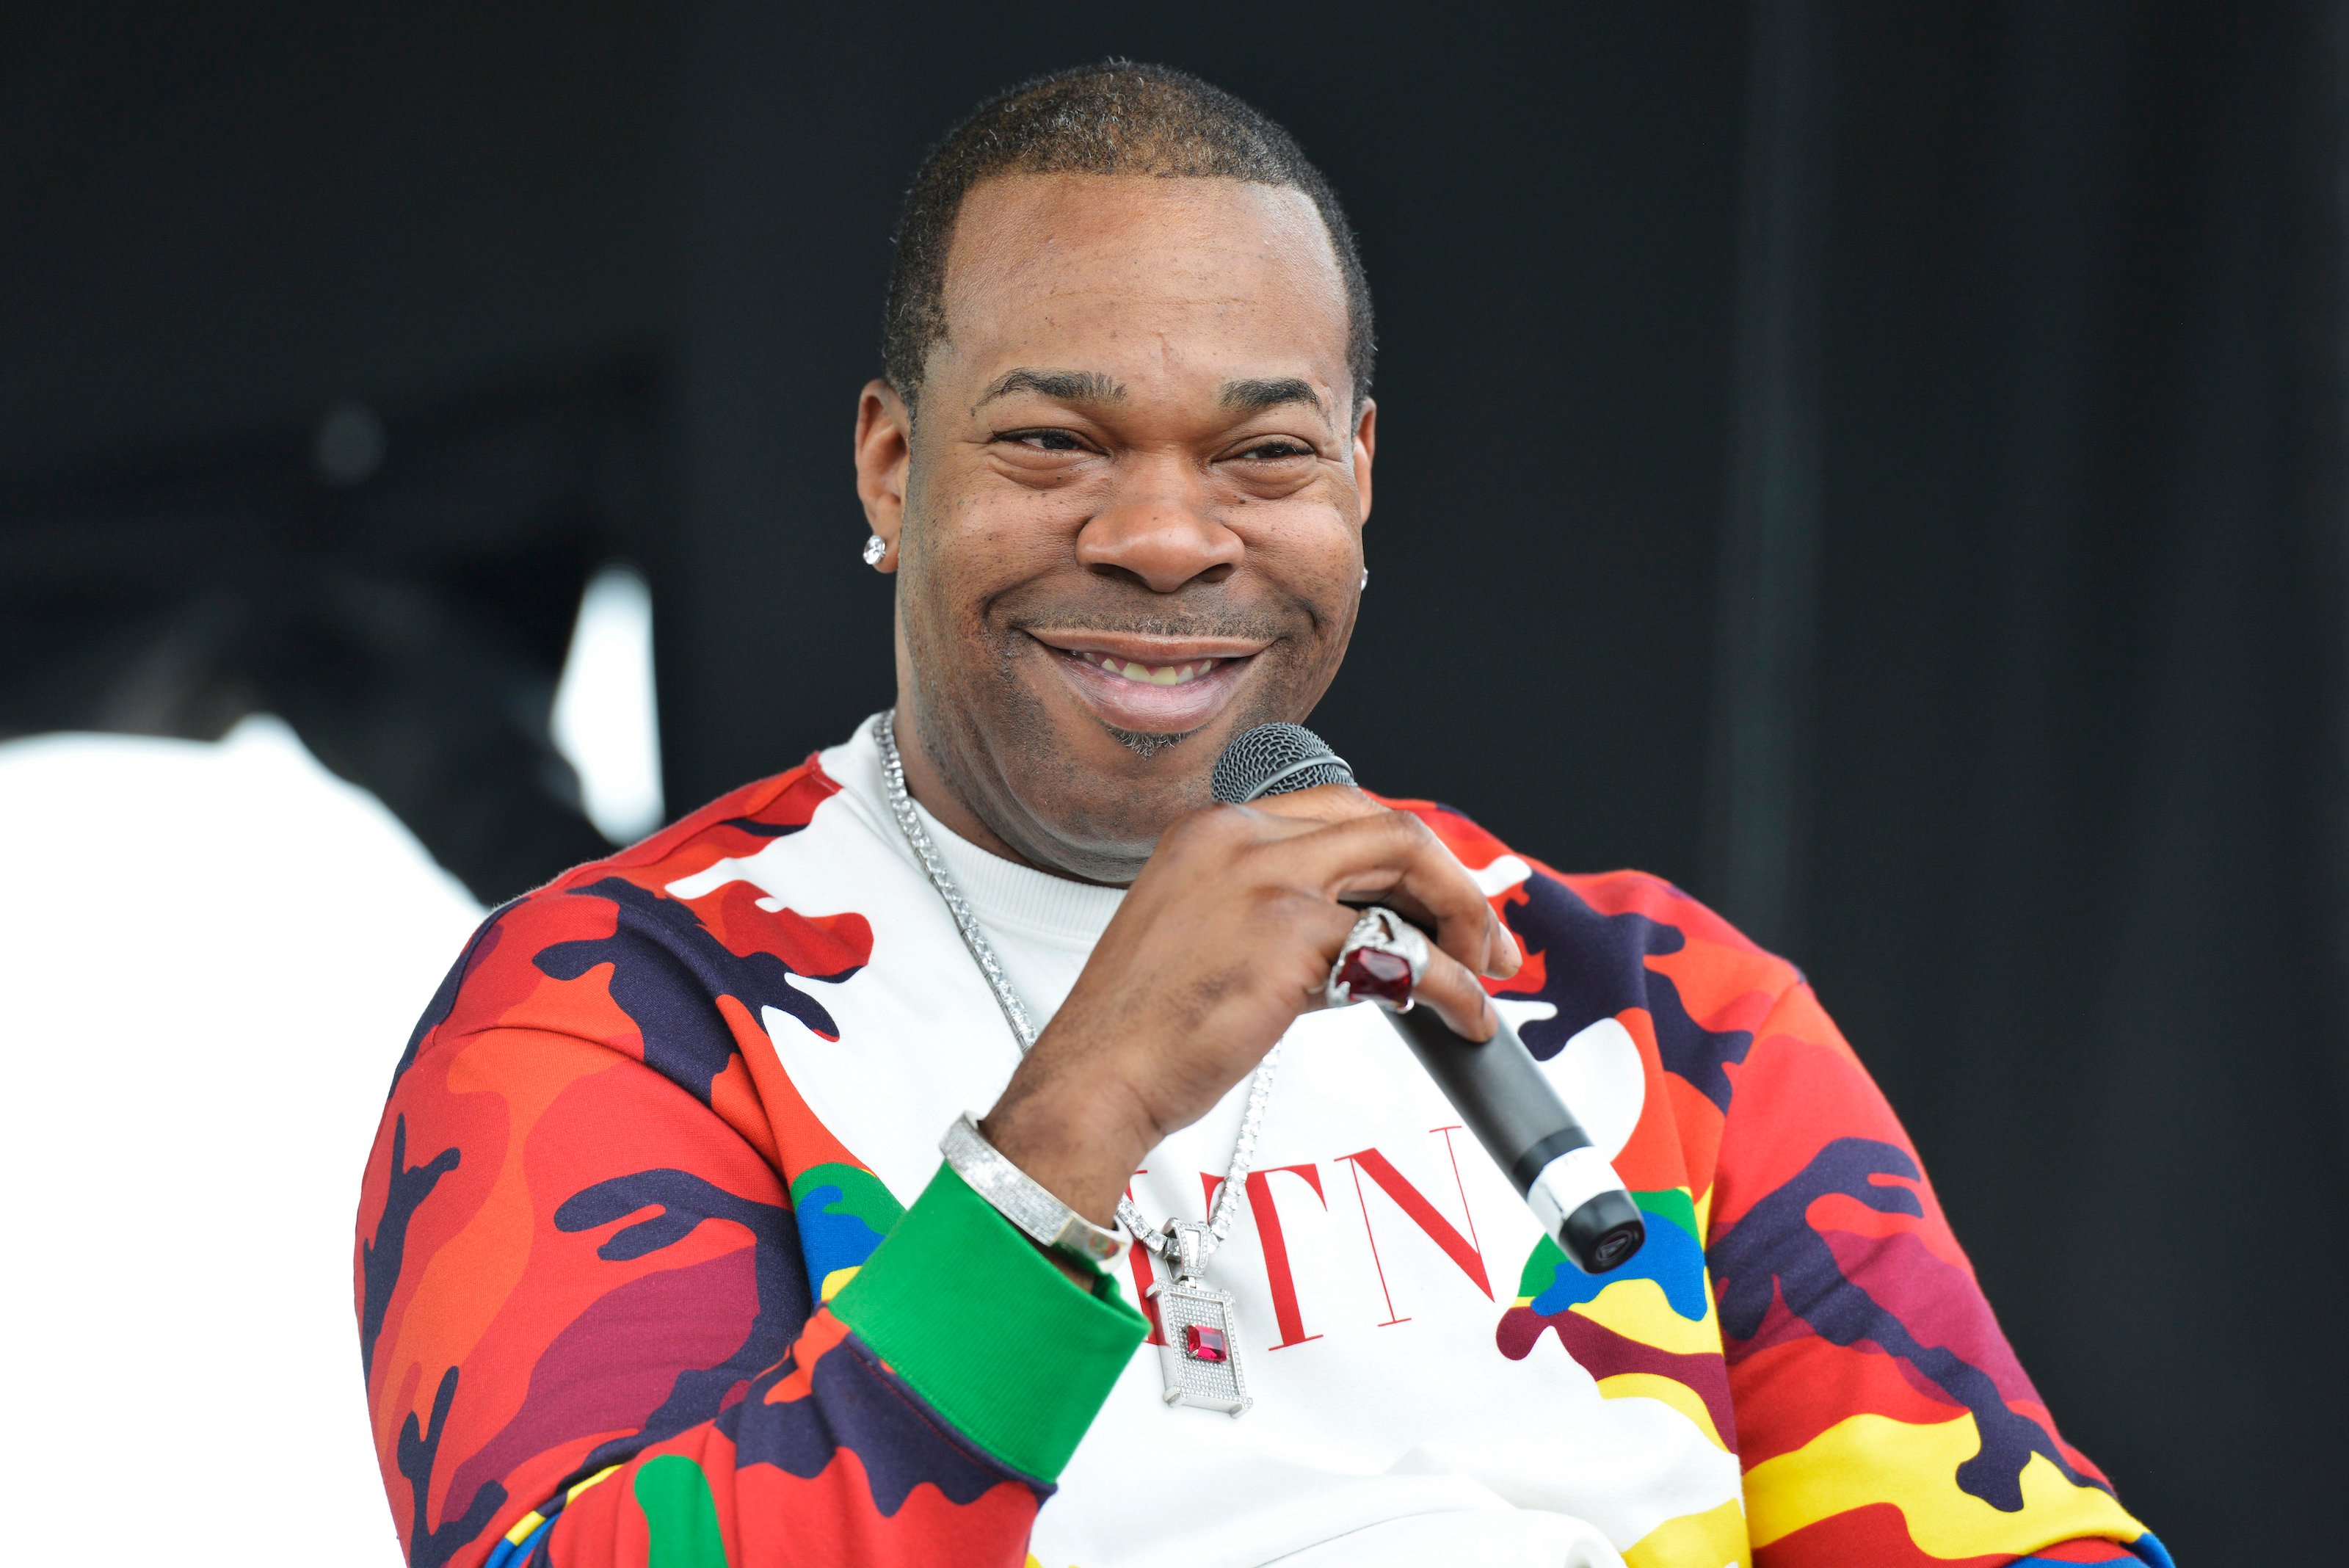 Busta Rhymes speaking on a mic